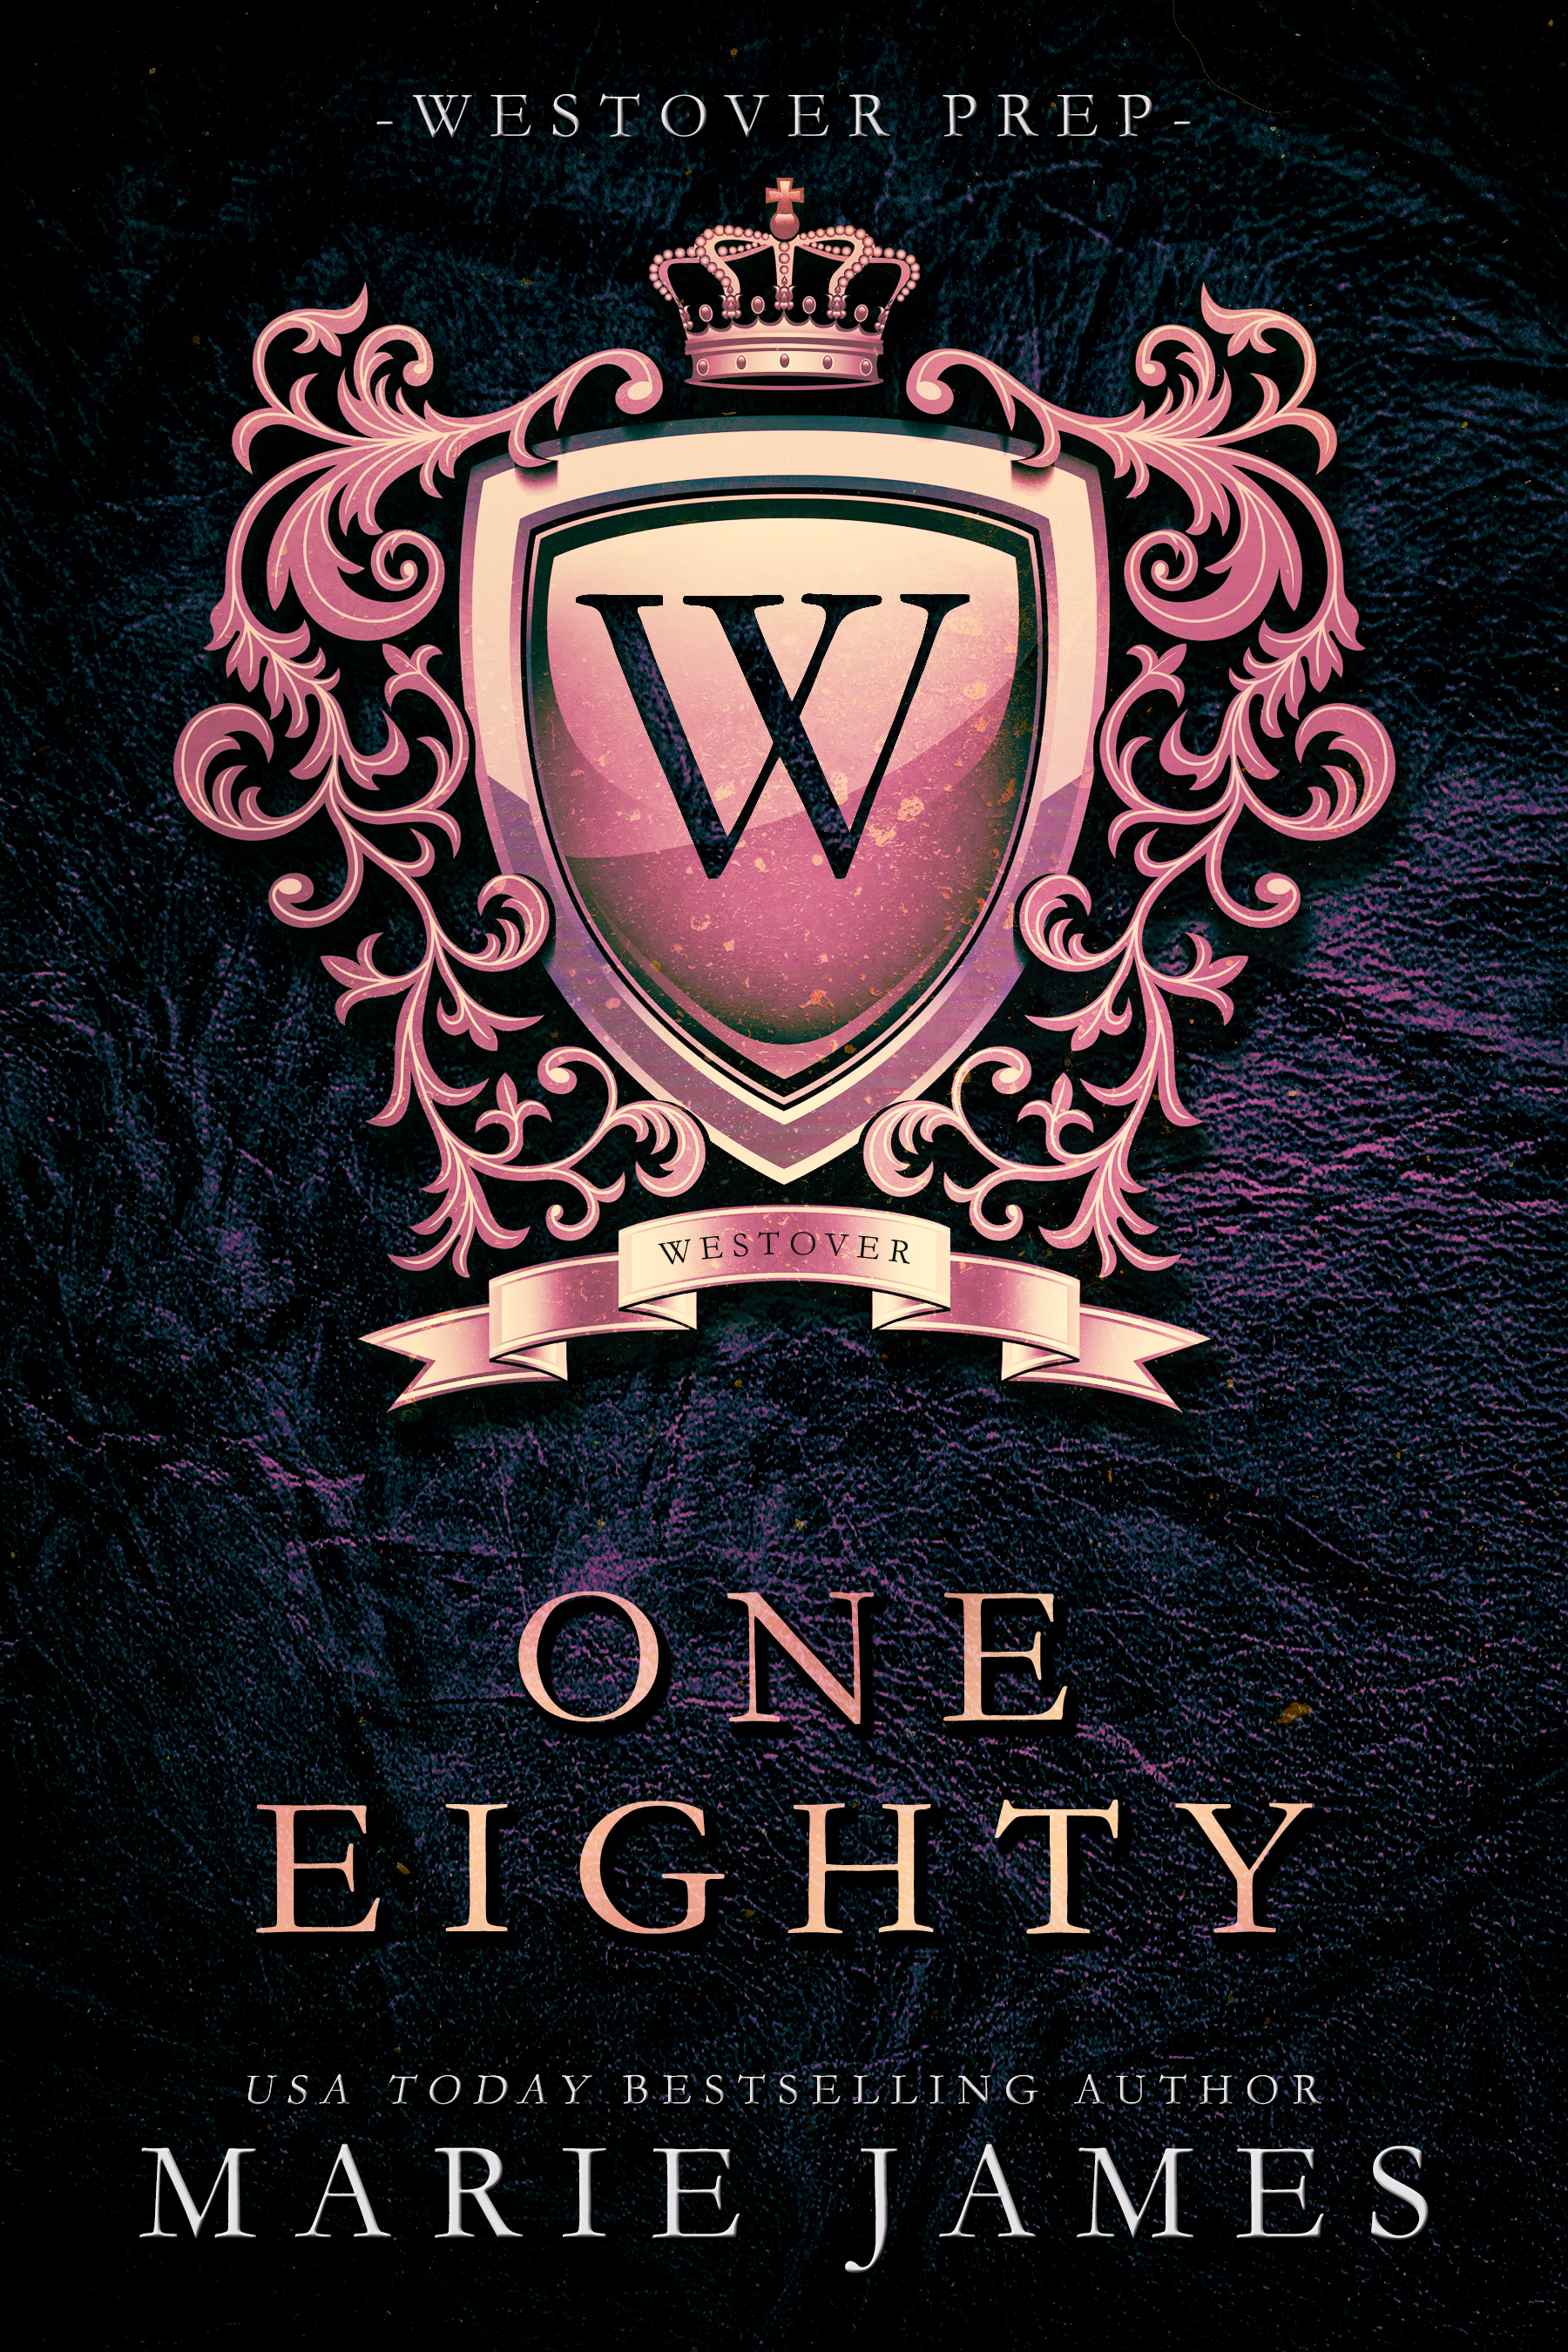 One Eighty by #MarieJames [Cover Reveal]